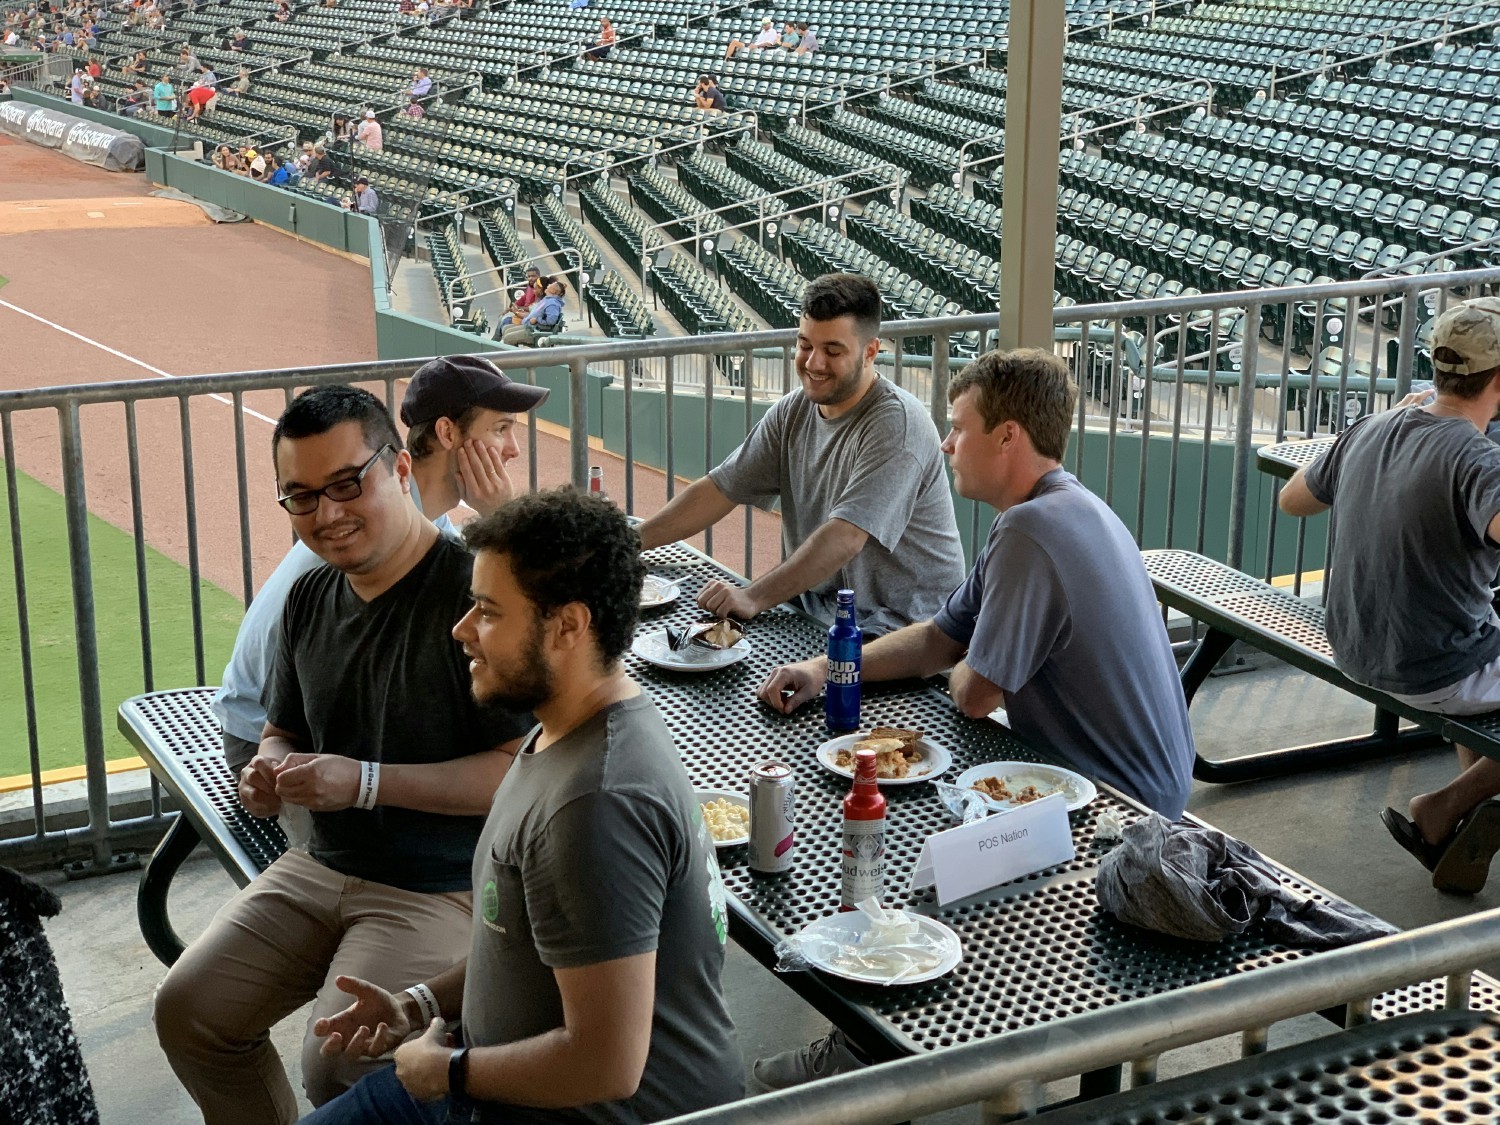 Team event at a baseball game in Charlotte!